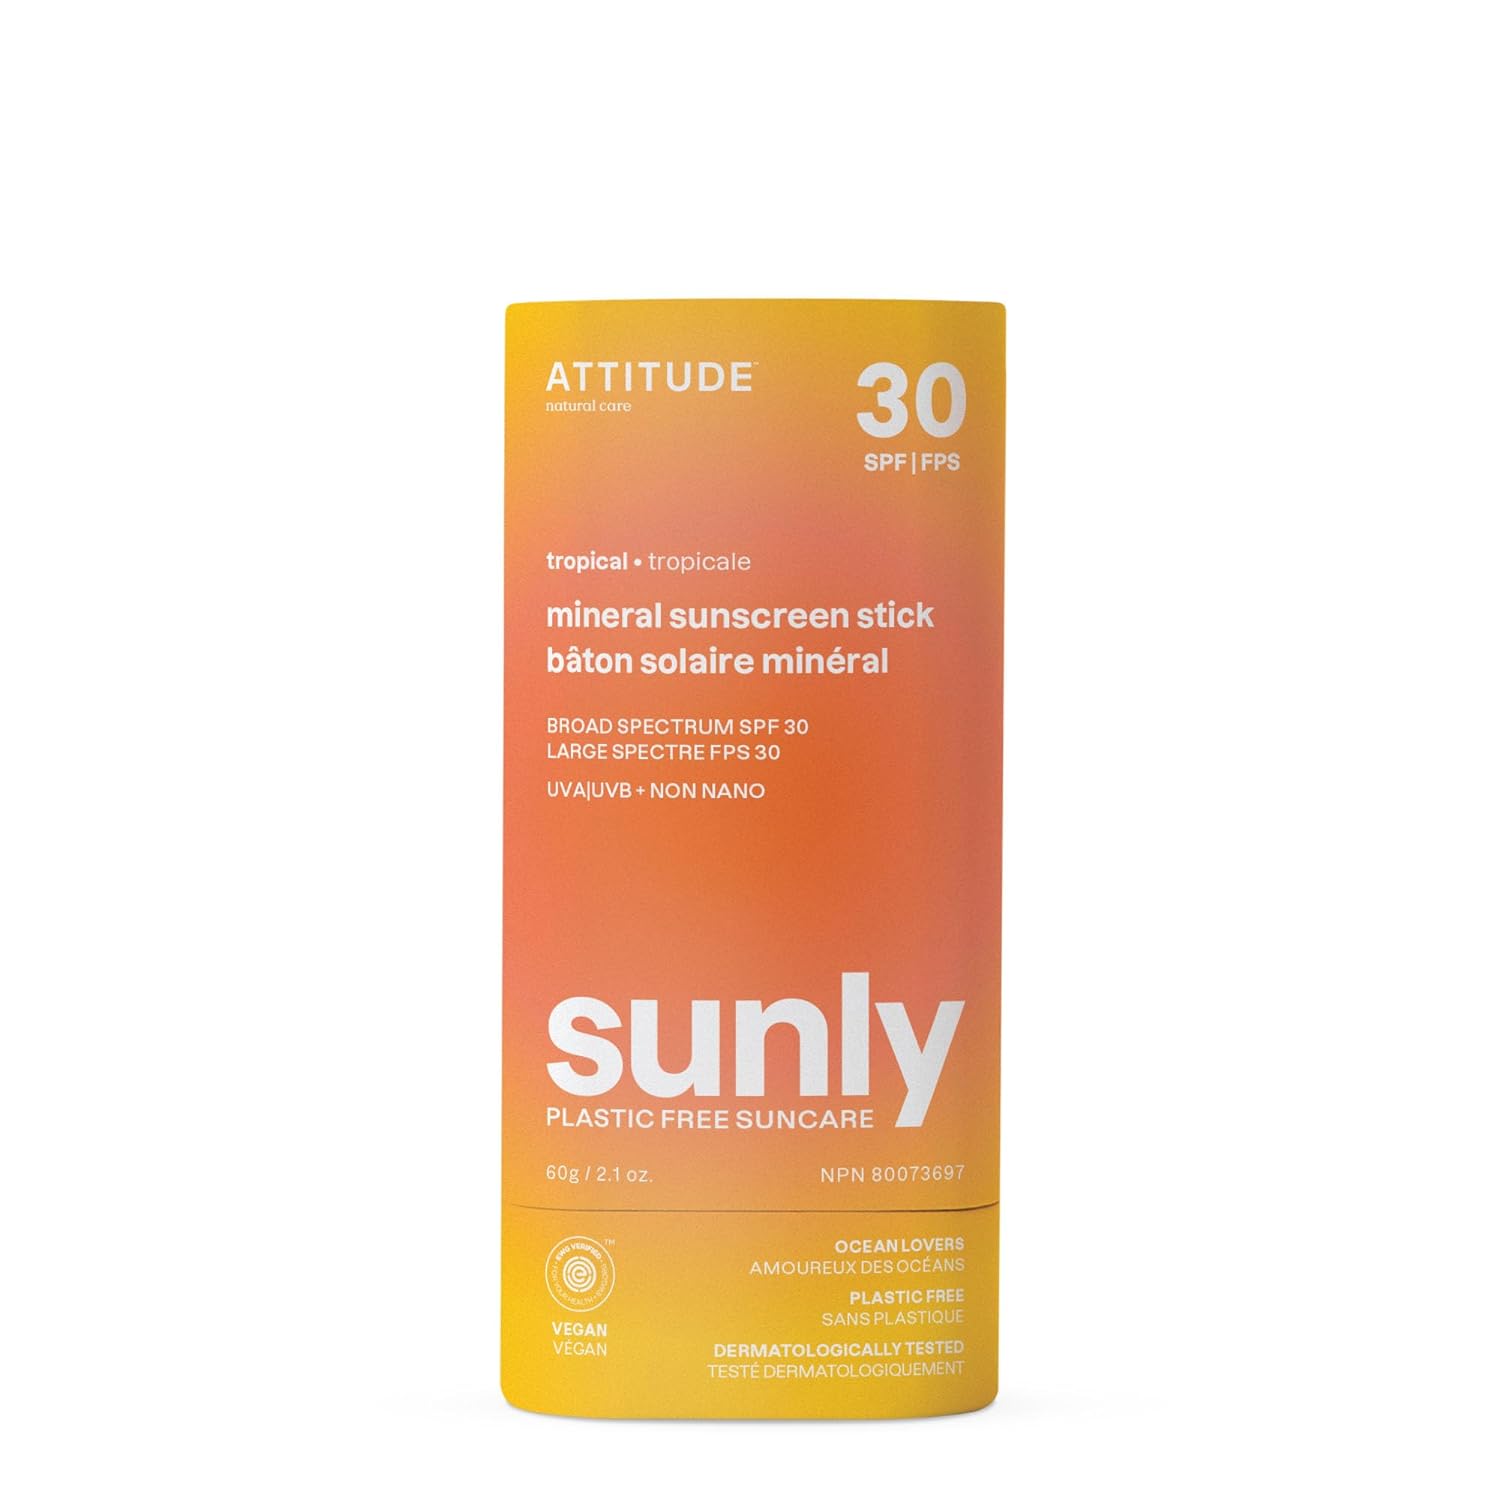 ATTITUDE Mineral Sunscreen Stick with Zinc Oxide, SPF 30, EWG Verified, Plastic-Free, Broad Spectrum UVA/UVB Protection, Dermatologically Tested, Vegan, Tropical, 2.1 Ounces